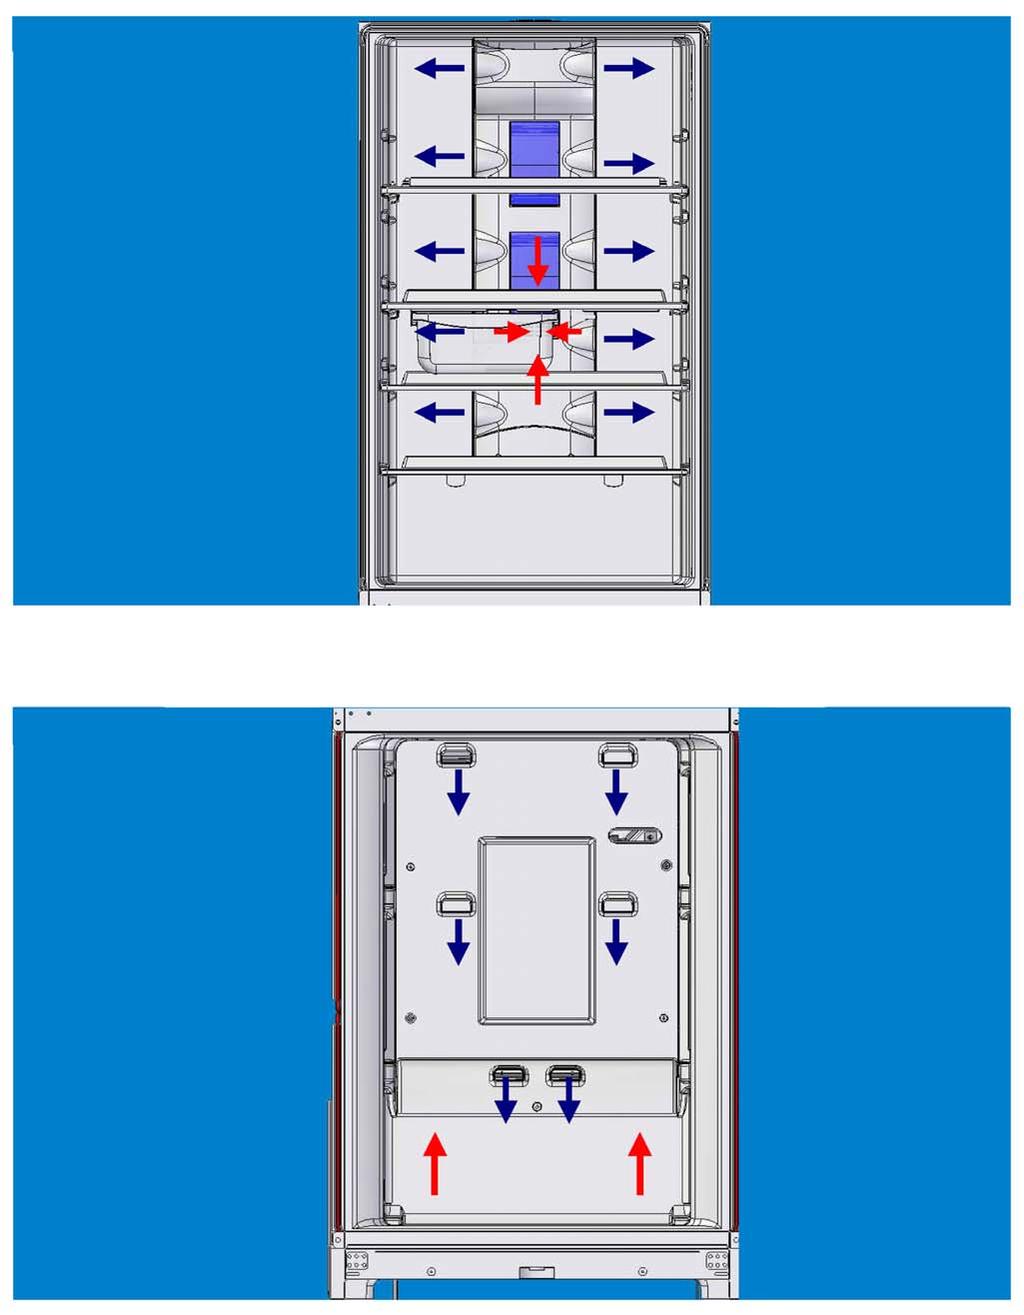 Blue = Delivery Red = Return Intake vent OPERATION (Fig 4) The cold air is delivered from the vents serving the